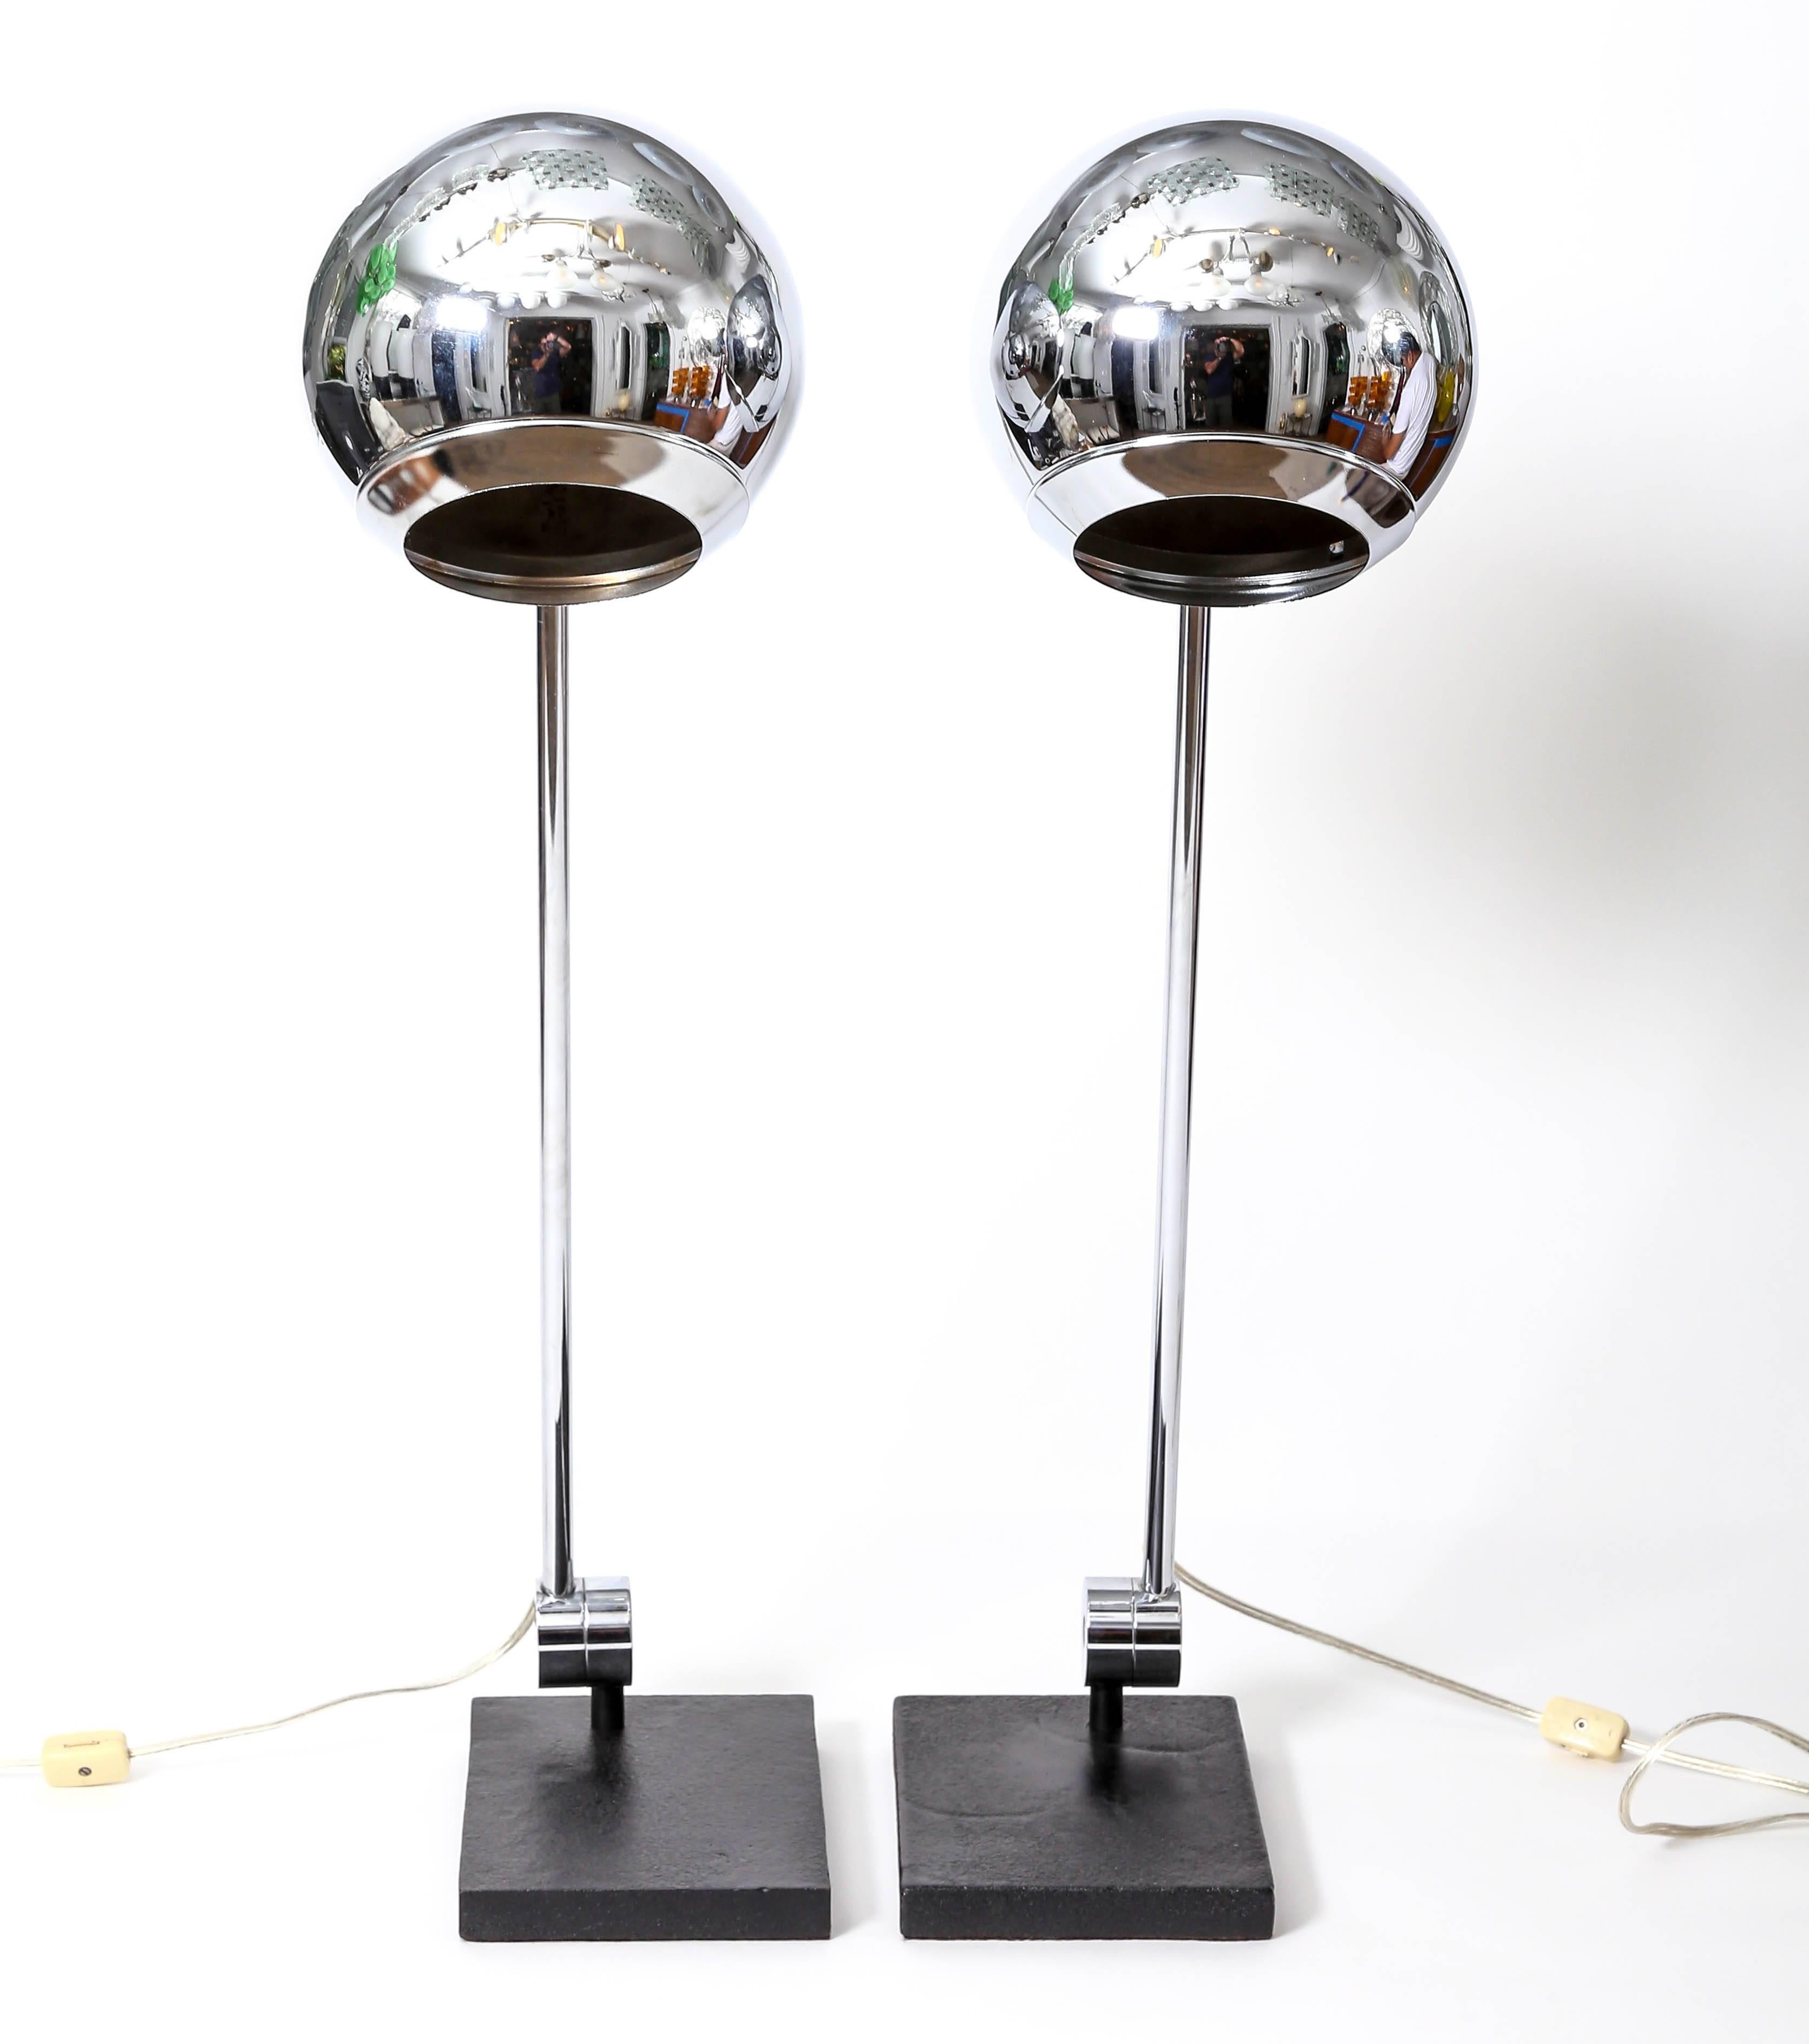 Pair of articulated polished metal orb table lamps with black metal bases by Robert Sonneman.